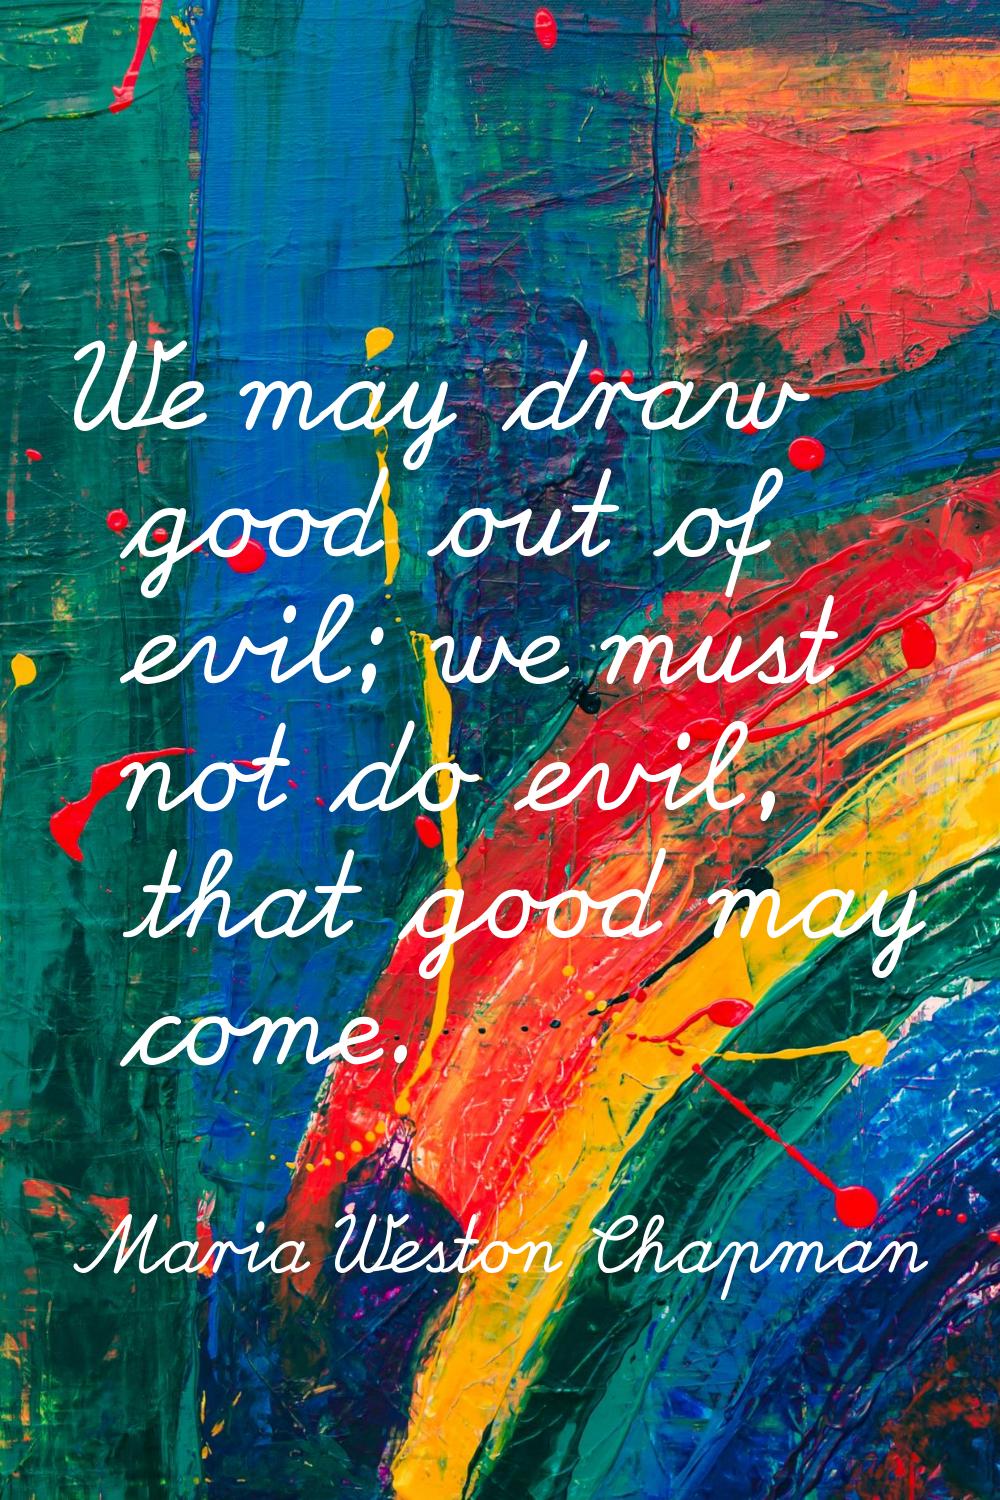 We may draw good out of evil; we must not do evil, that good may come.